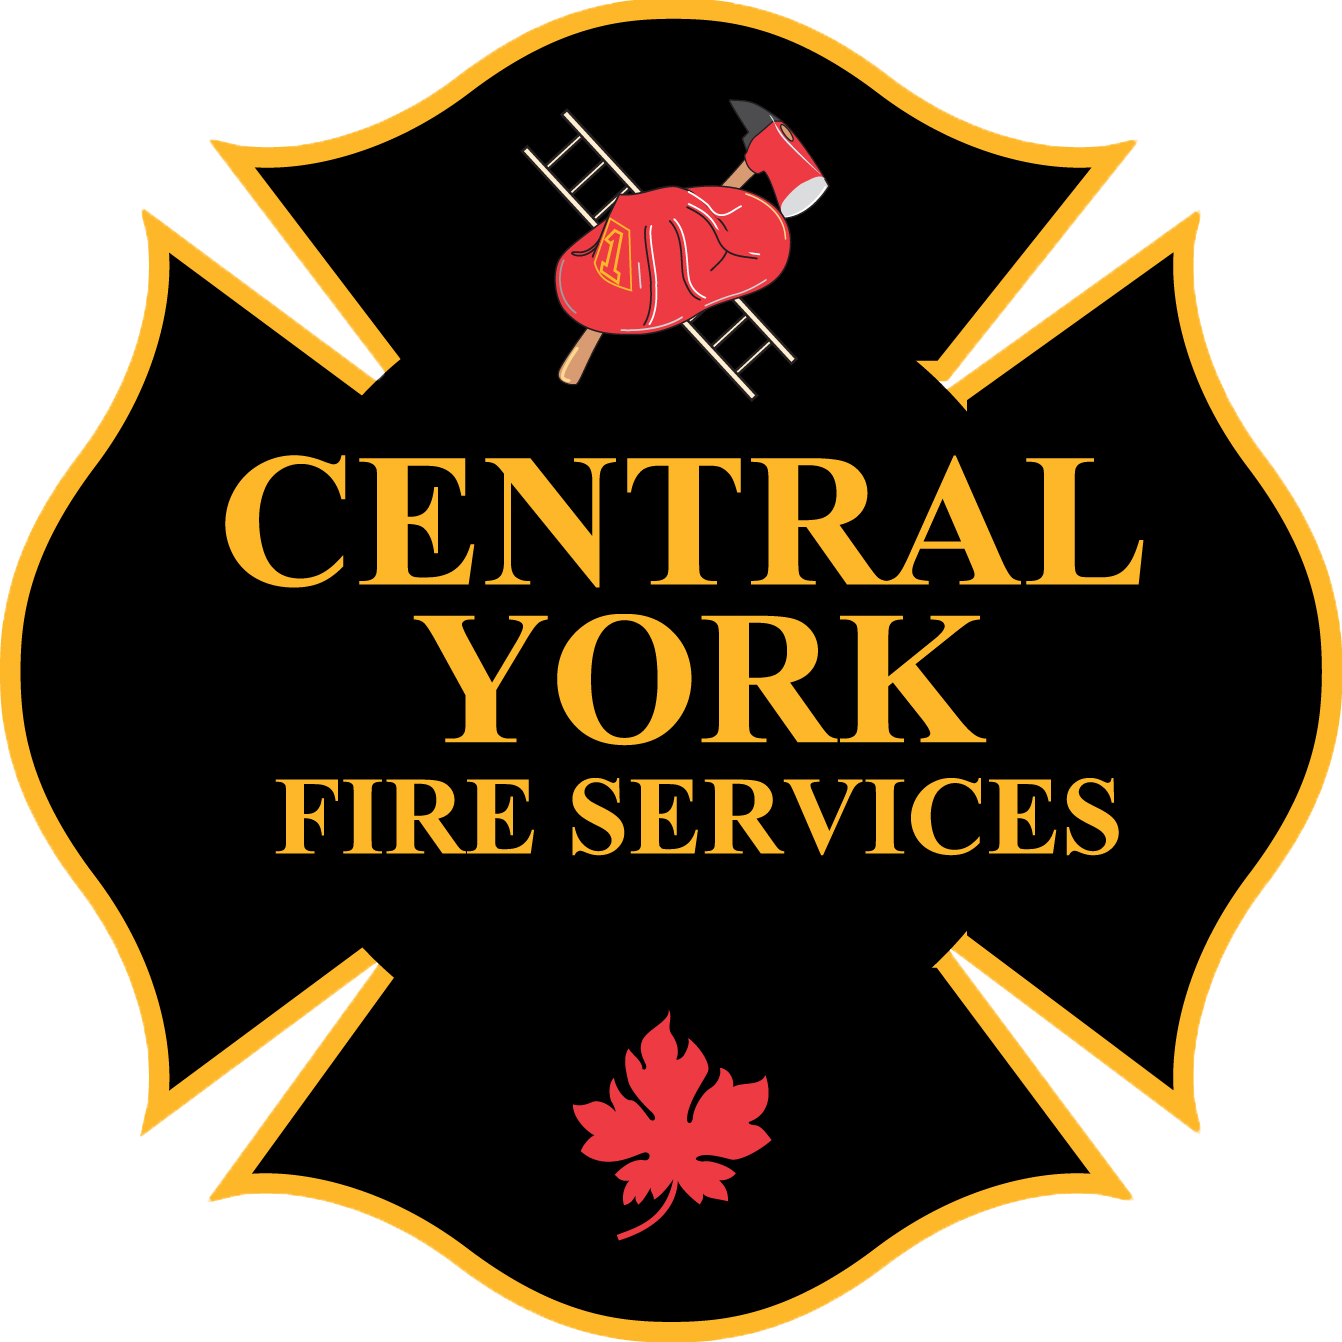 Image of Central York Fire Services Logo